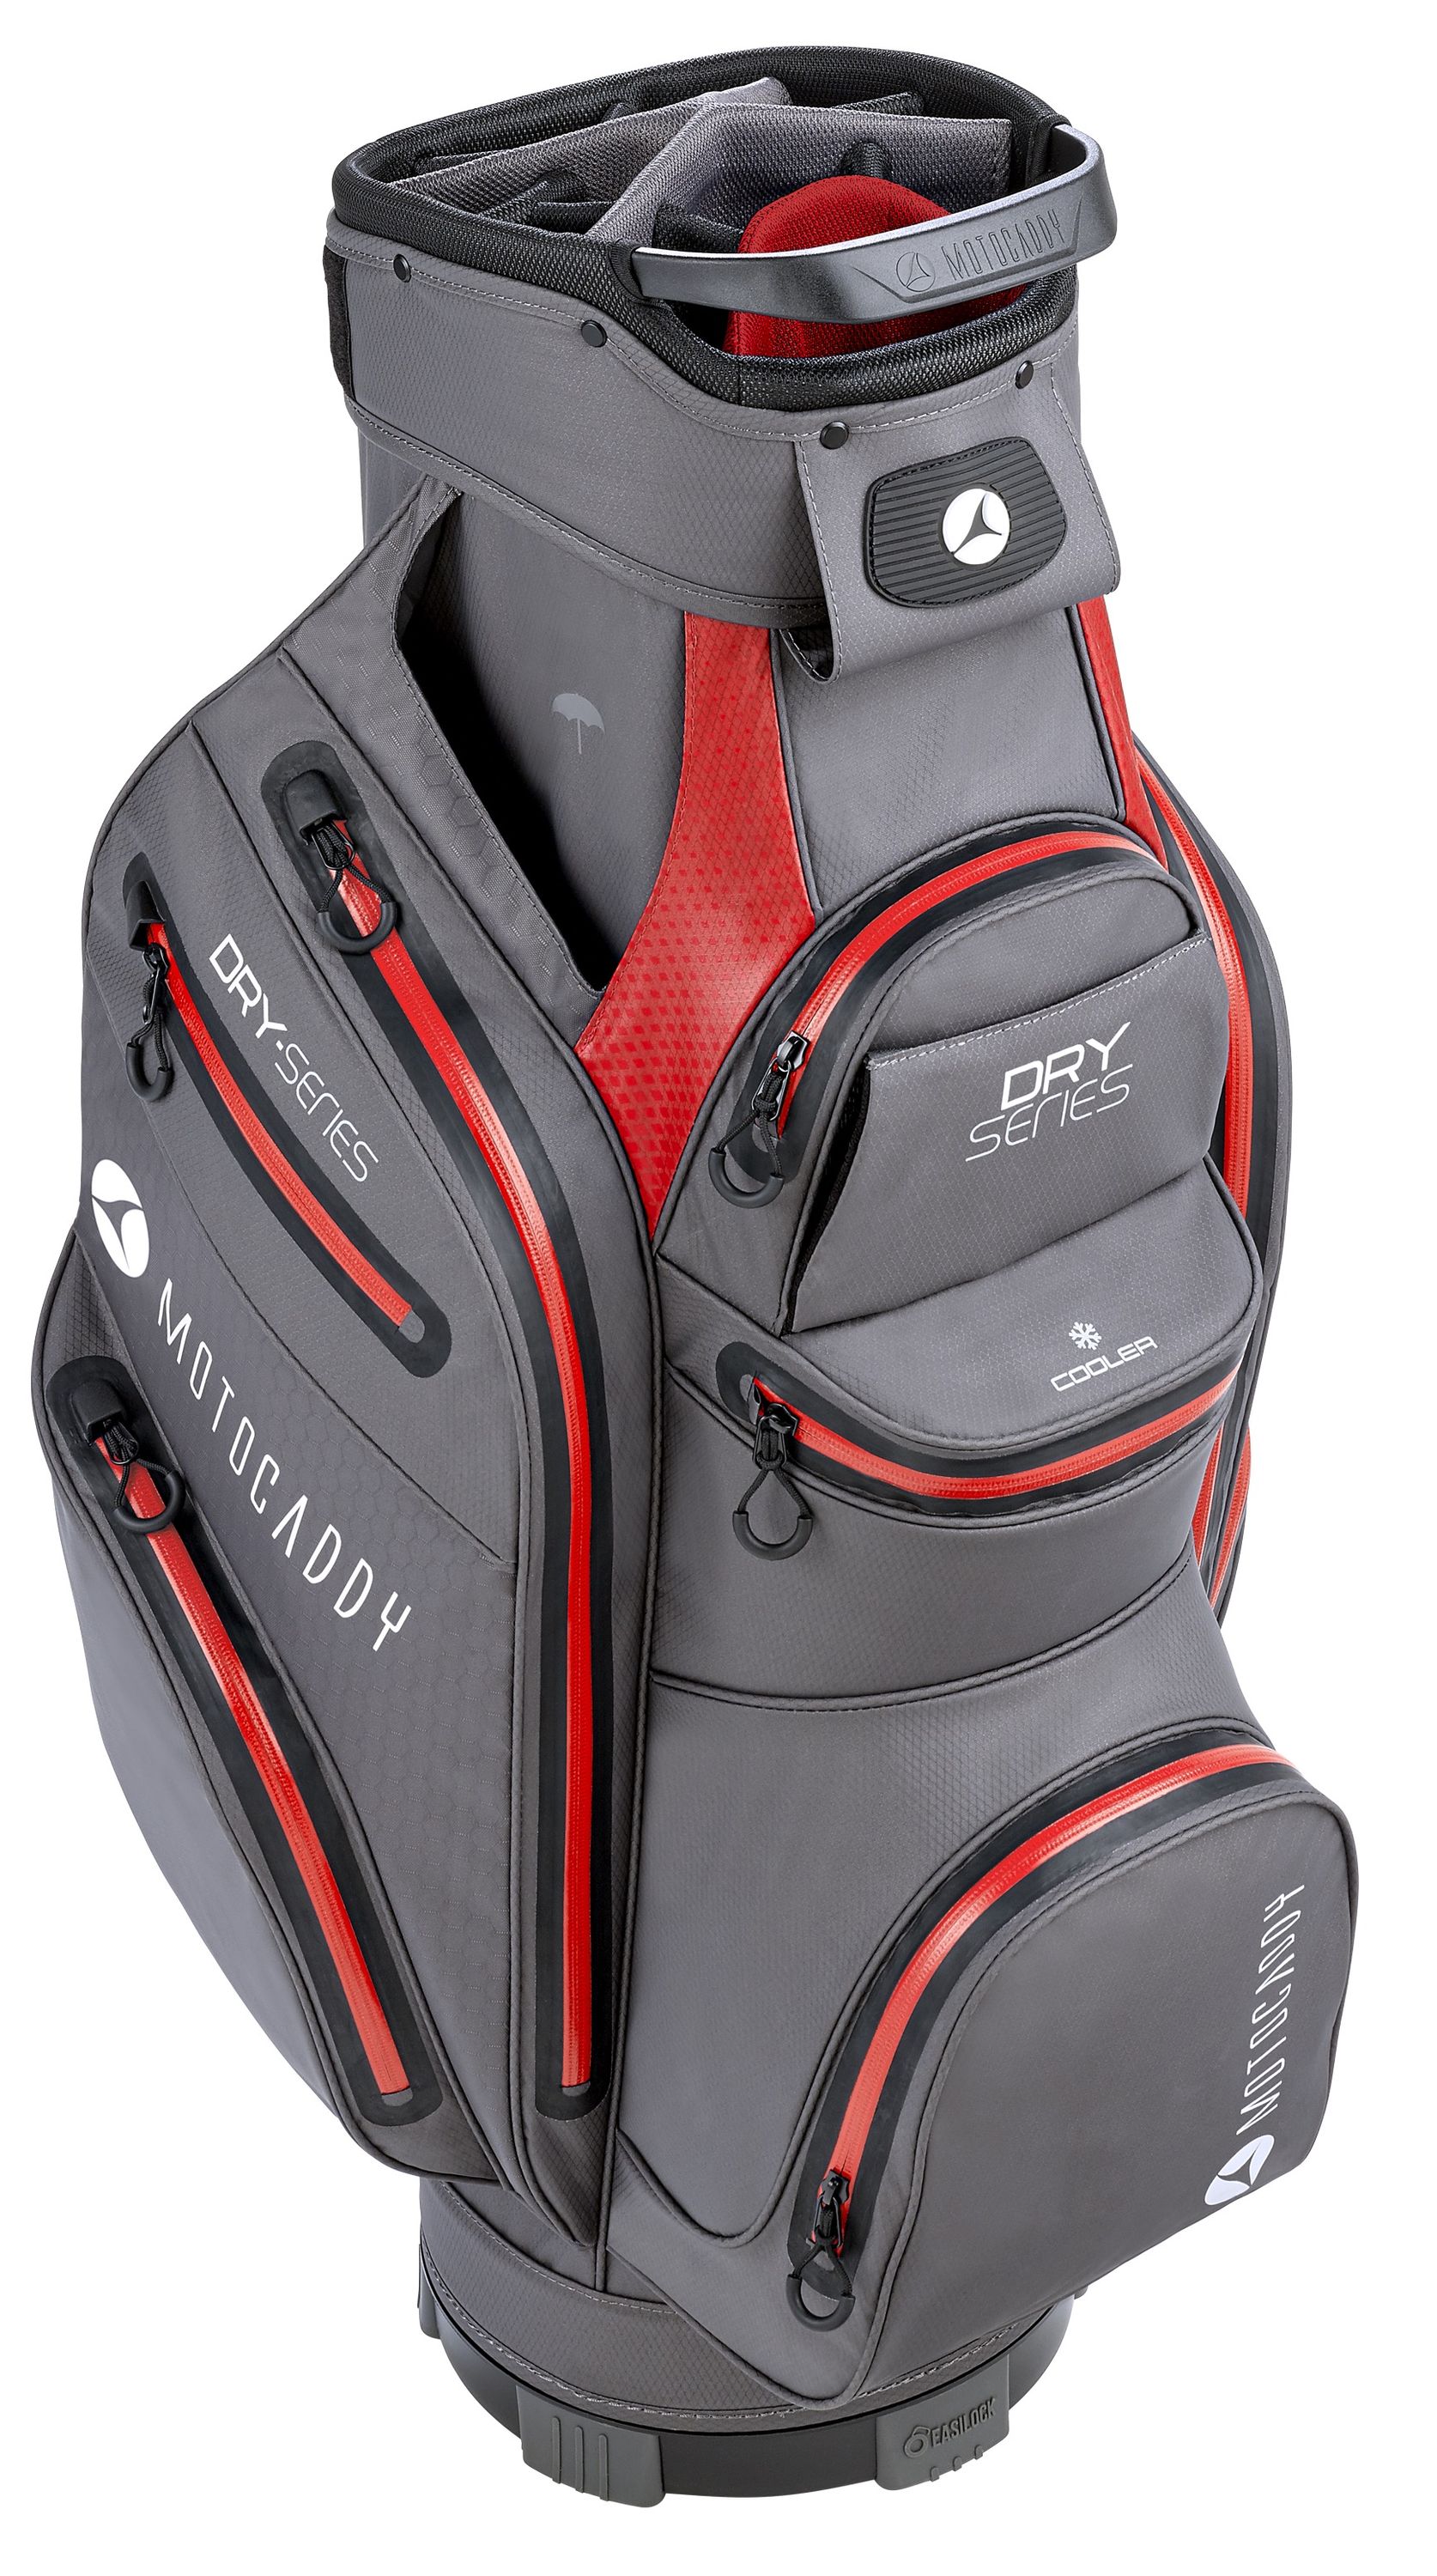 Motocaddy Dry Series Charcoal/Red Cartbag